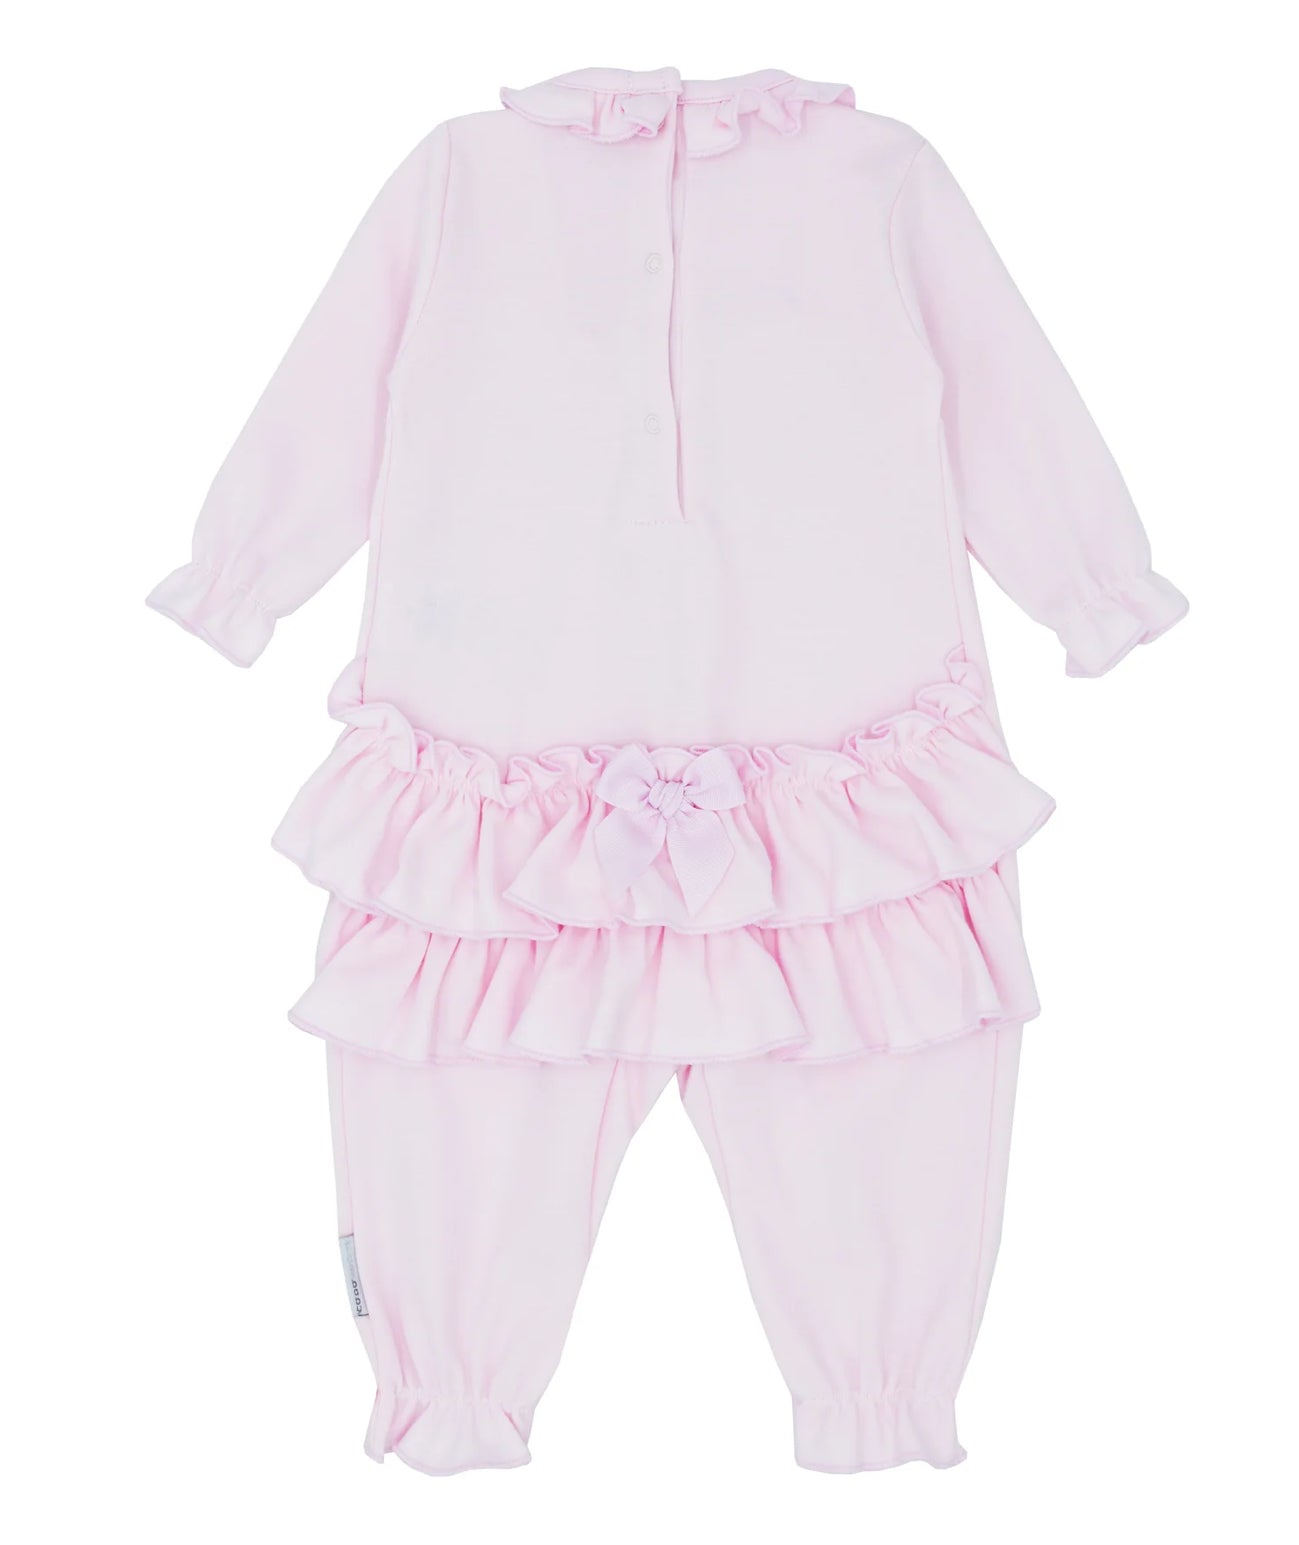 Blues Baby pink frill baby grow